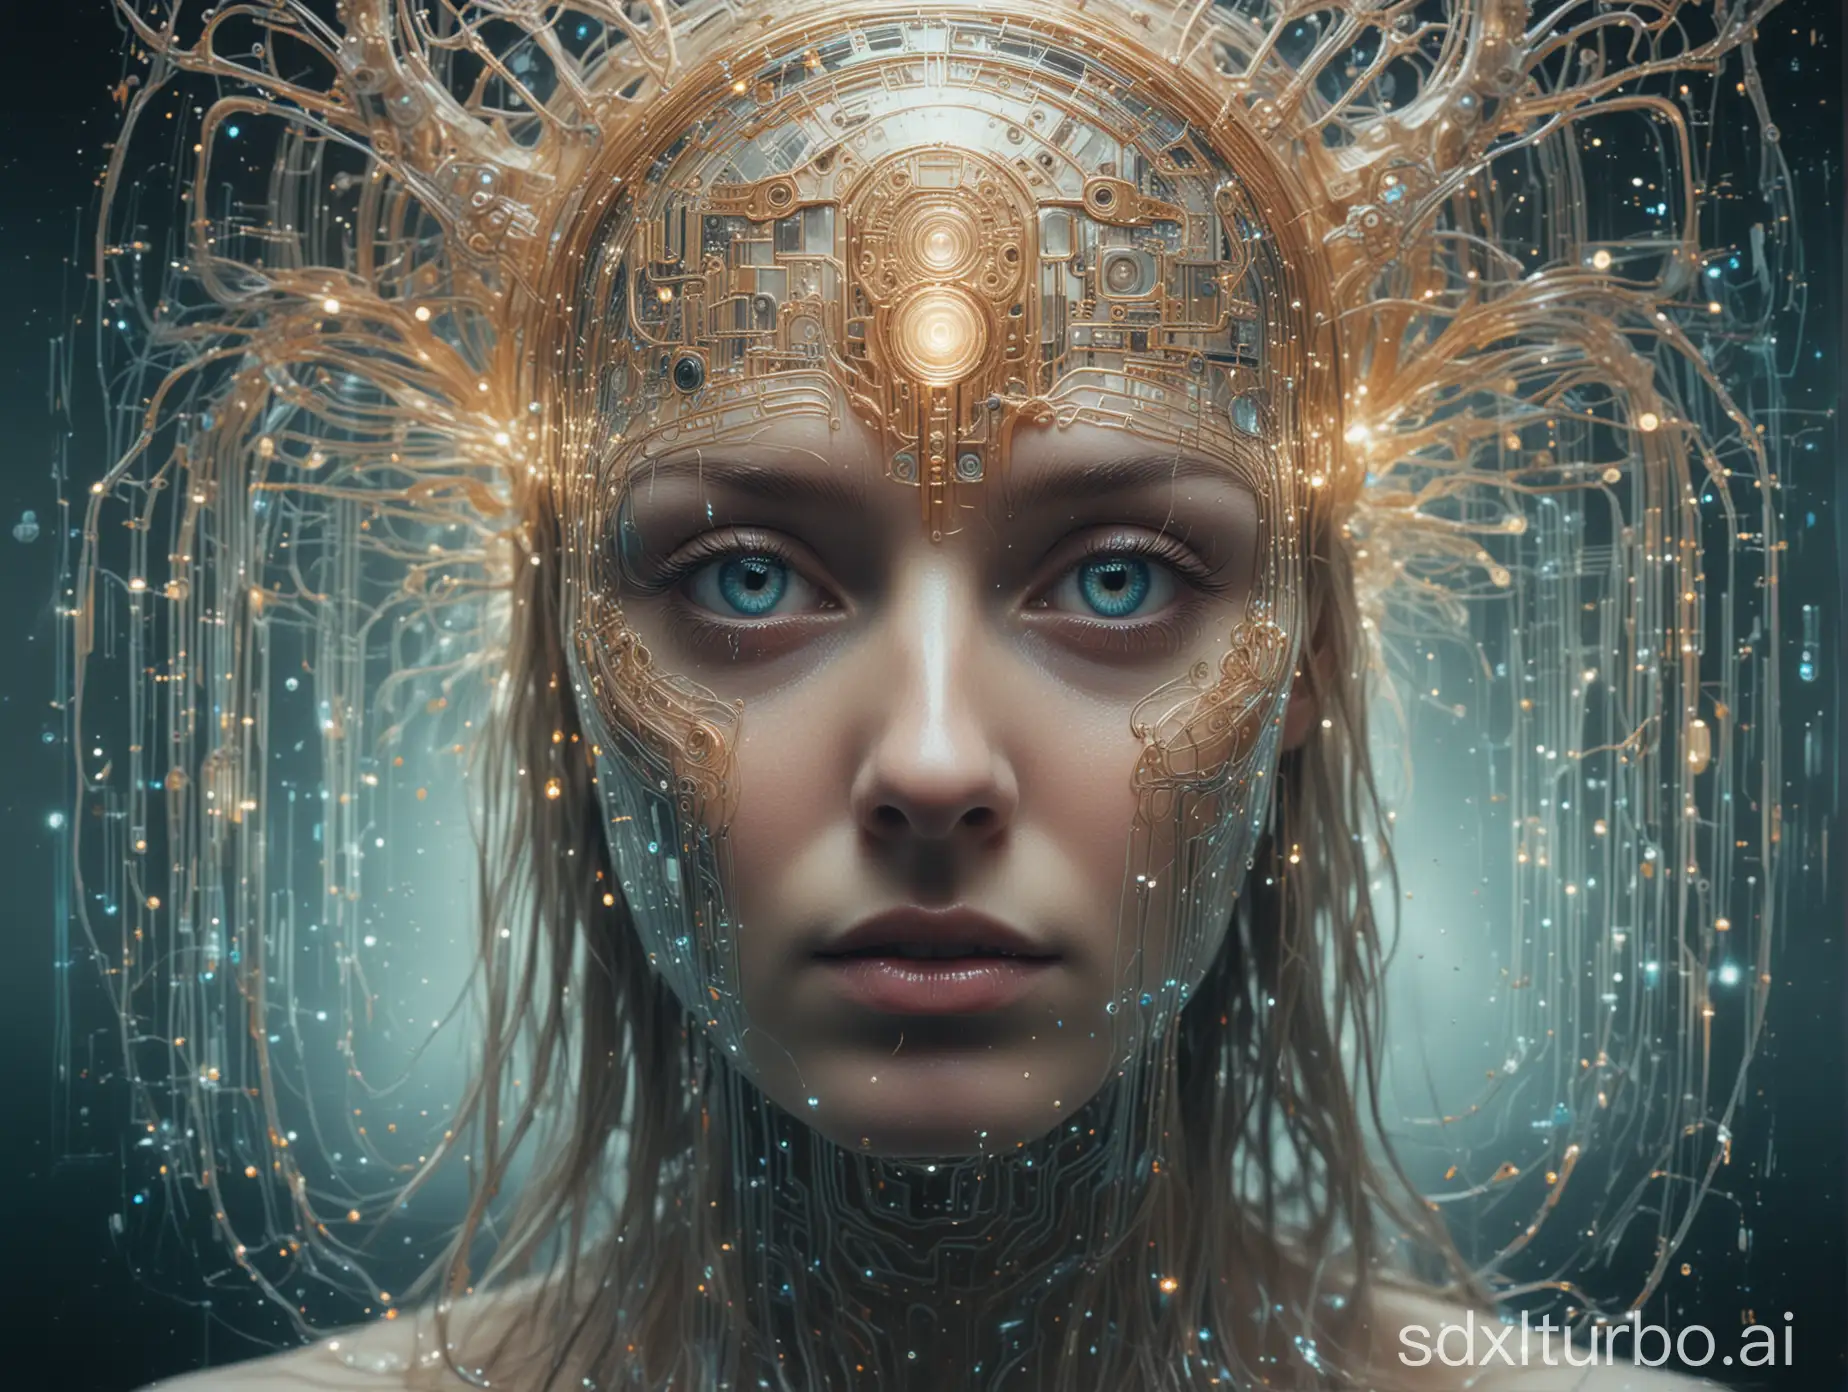 A polished bioluminescent AI deity gazes from a polaroid photograph, its metallic surface shimmering with ethereal light. This mesmerizing digital painting captures intricate circuits and captivating luminescent eyes, evoking a sense of technological divinity and celestial beauty. A high-resolution masterpiece that captivates with its enigmatic presence.